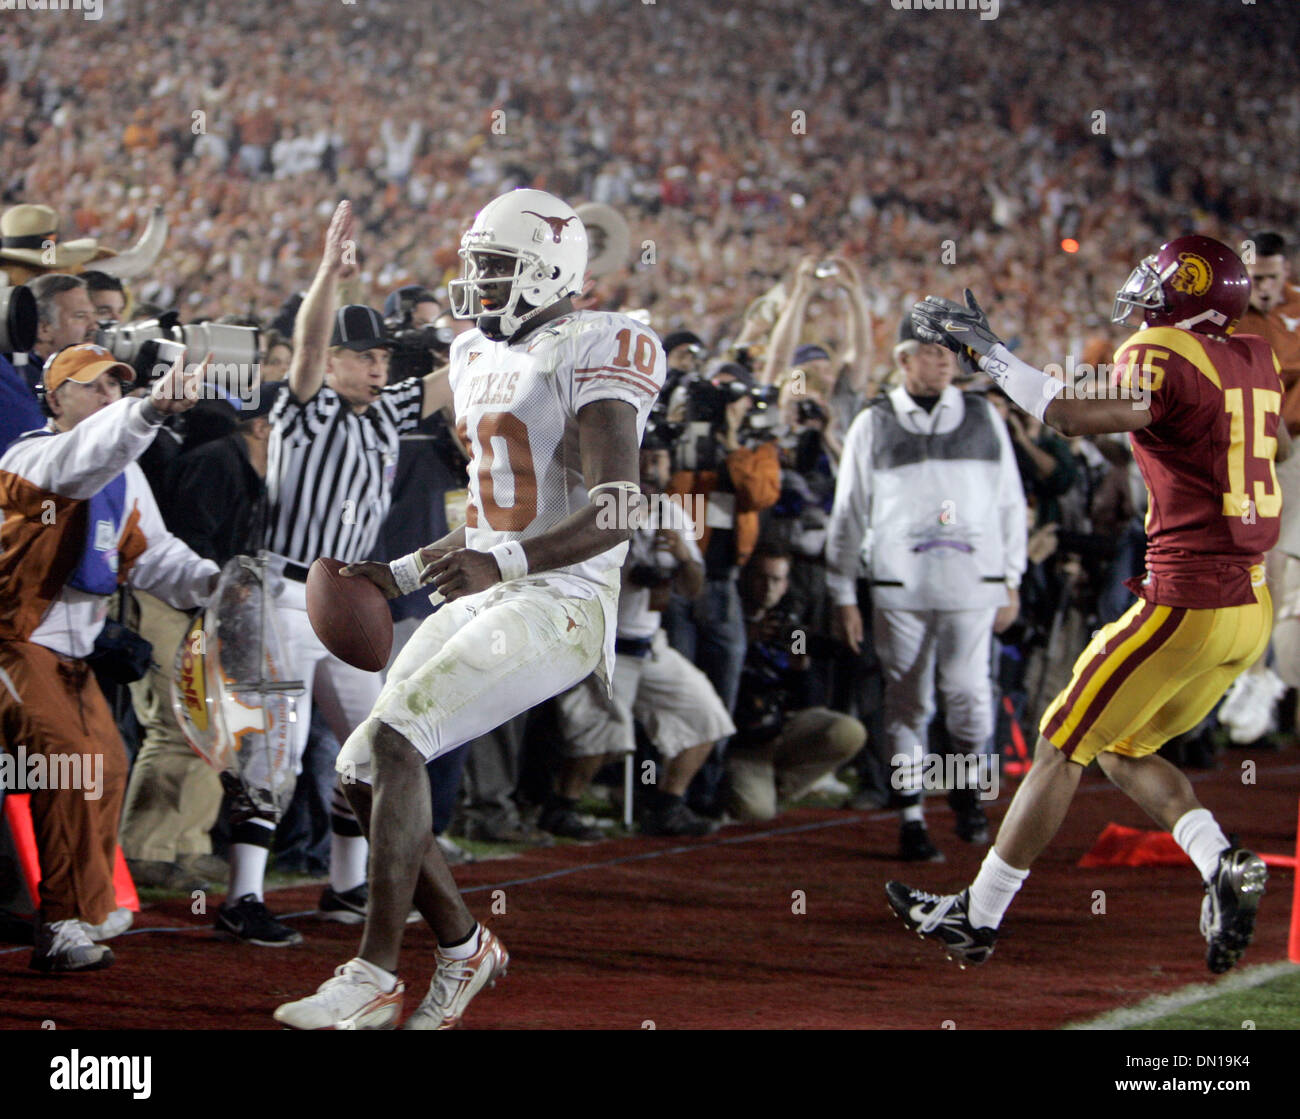 Vince Young to be featured on Rose Bowl LIVE! - University of